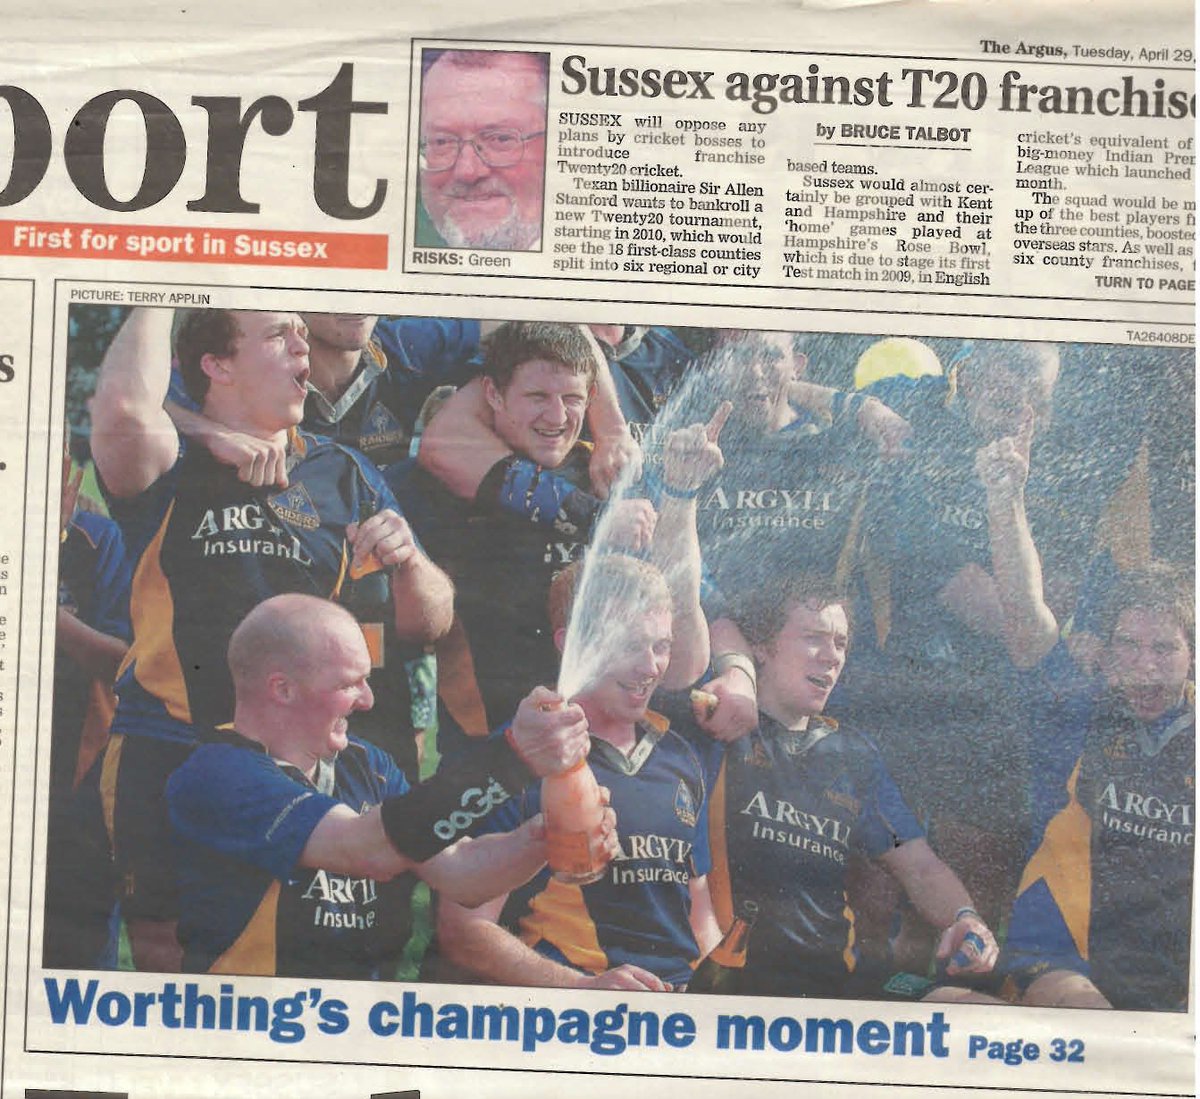 Today’s look back through the @worthingrfc archives takes us back to 2008 #WRFC100 #centenaryyear #worthing #100years #oneclub #rugbyforall